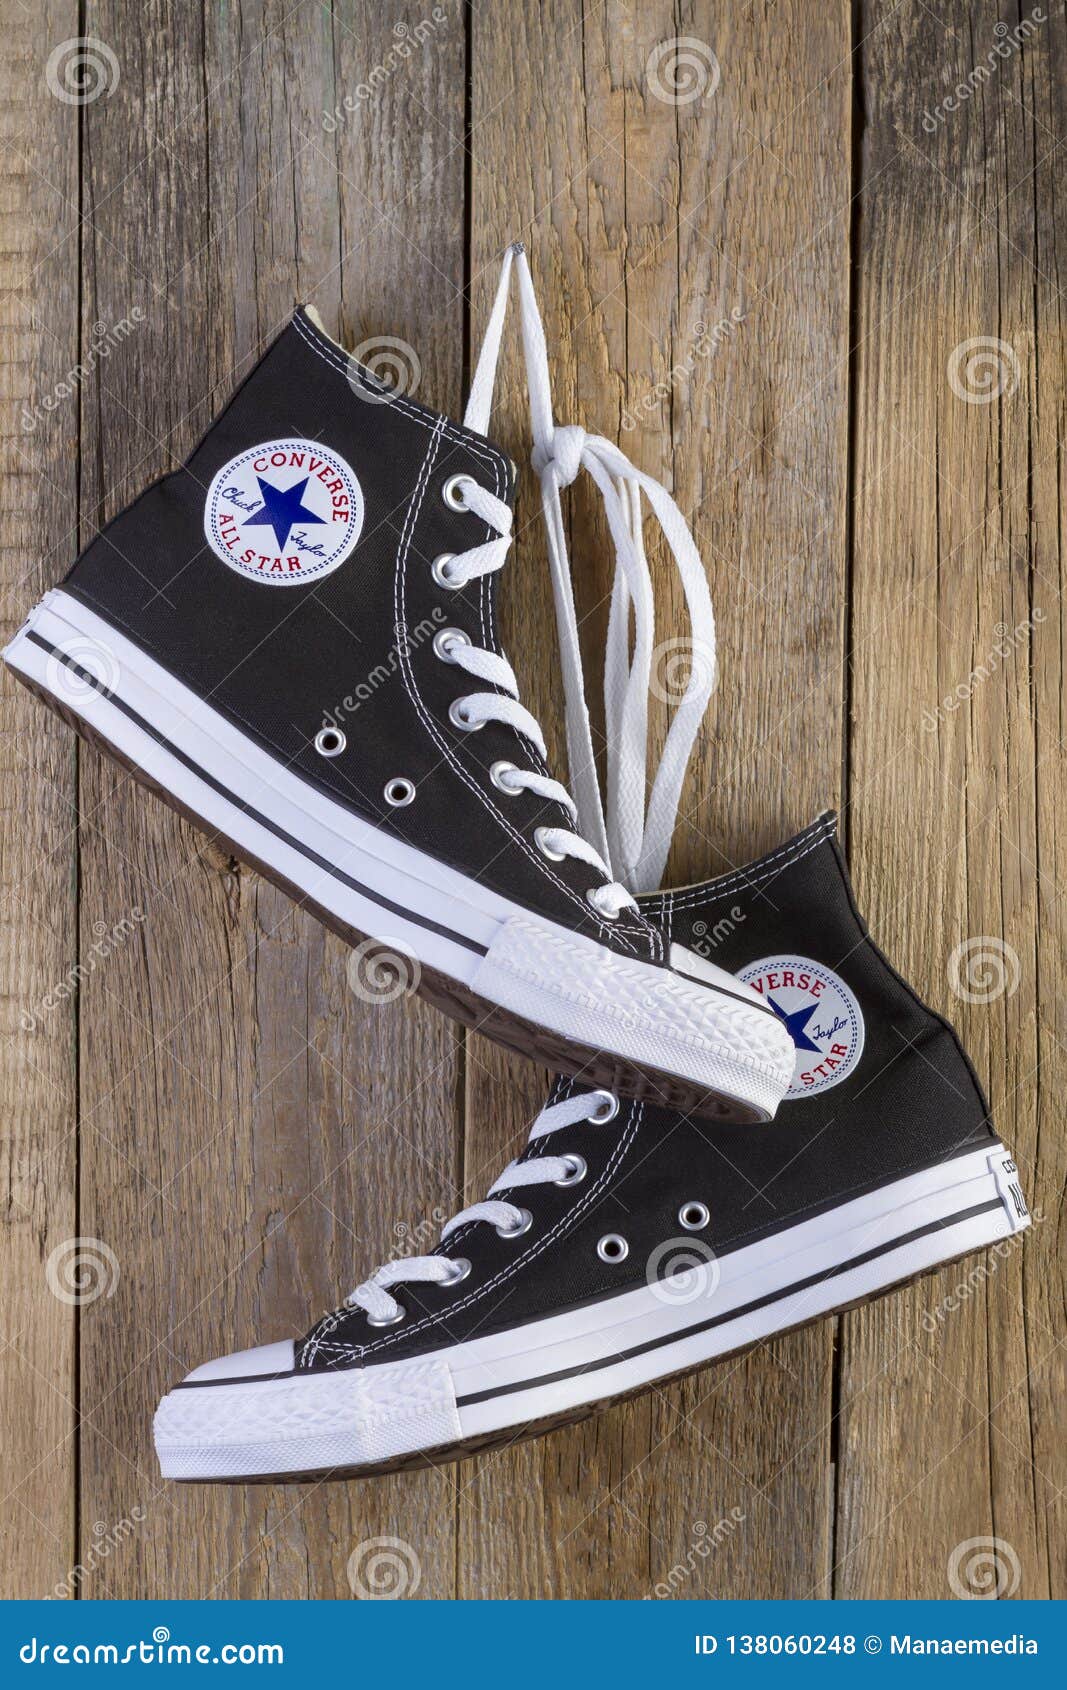 Black Converse Sneakers Shoes on Wood 